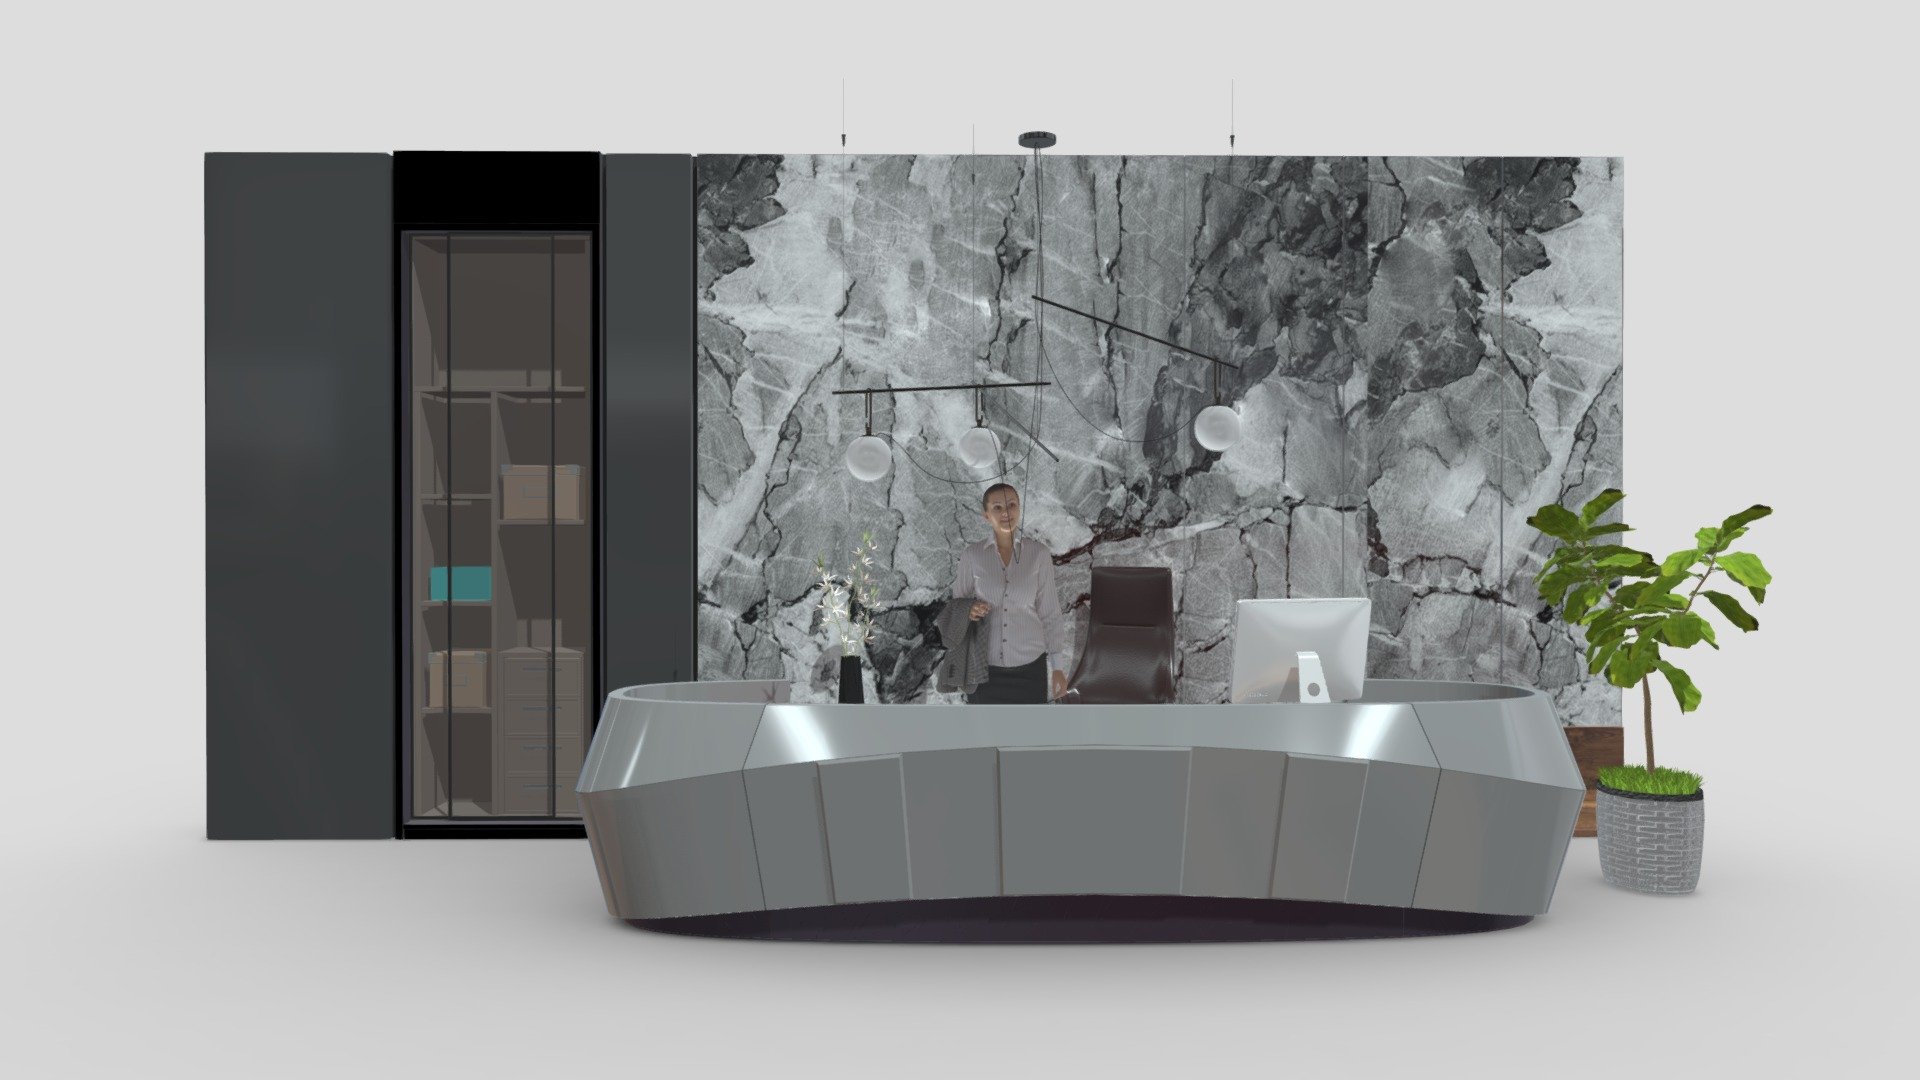 Reception Desk - 043

Native Format File : 3Ds Max 2020 &ndash; Rendering by Vray Next

File save as : 3Ds Max 2017 with converted all object to Editable Poly.

Exporting Formats :
Autodesk FBX ( .fbx ) and OBJ ( .obj &amp; .mtl ).

All 153 Texture maps are include as JPG.

Support 24/7 3d model